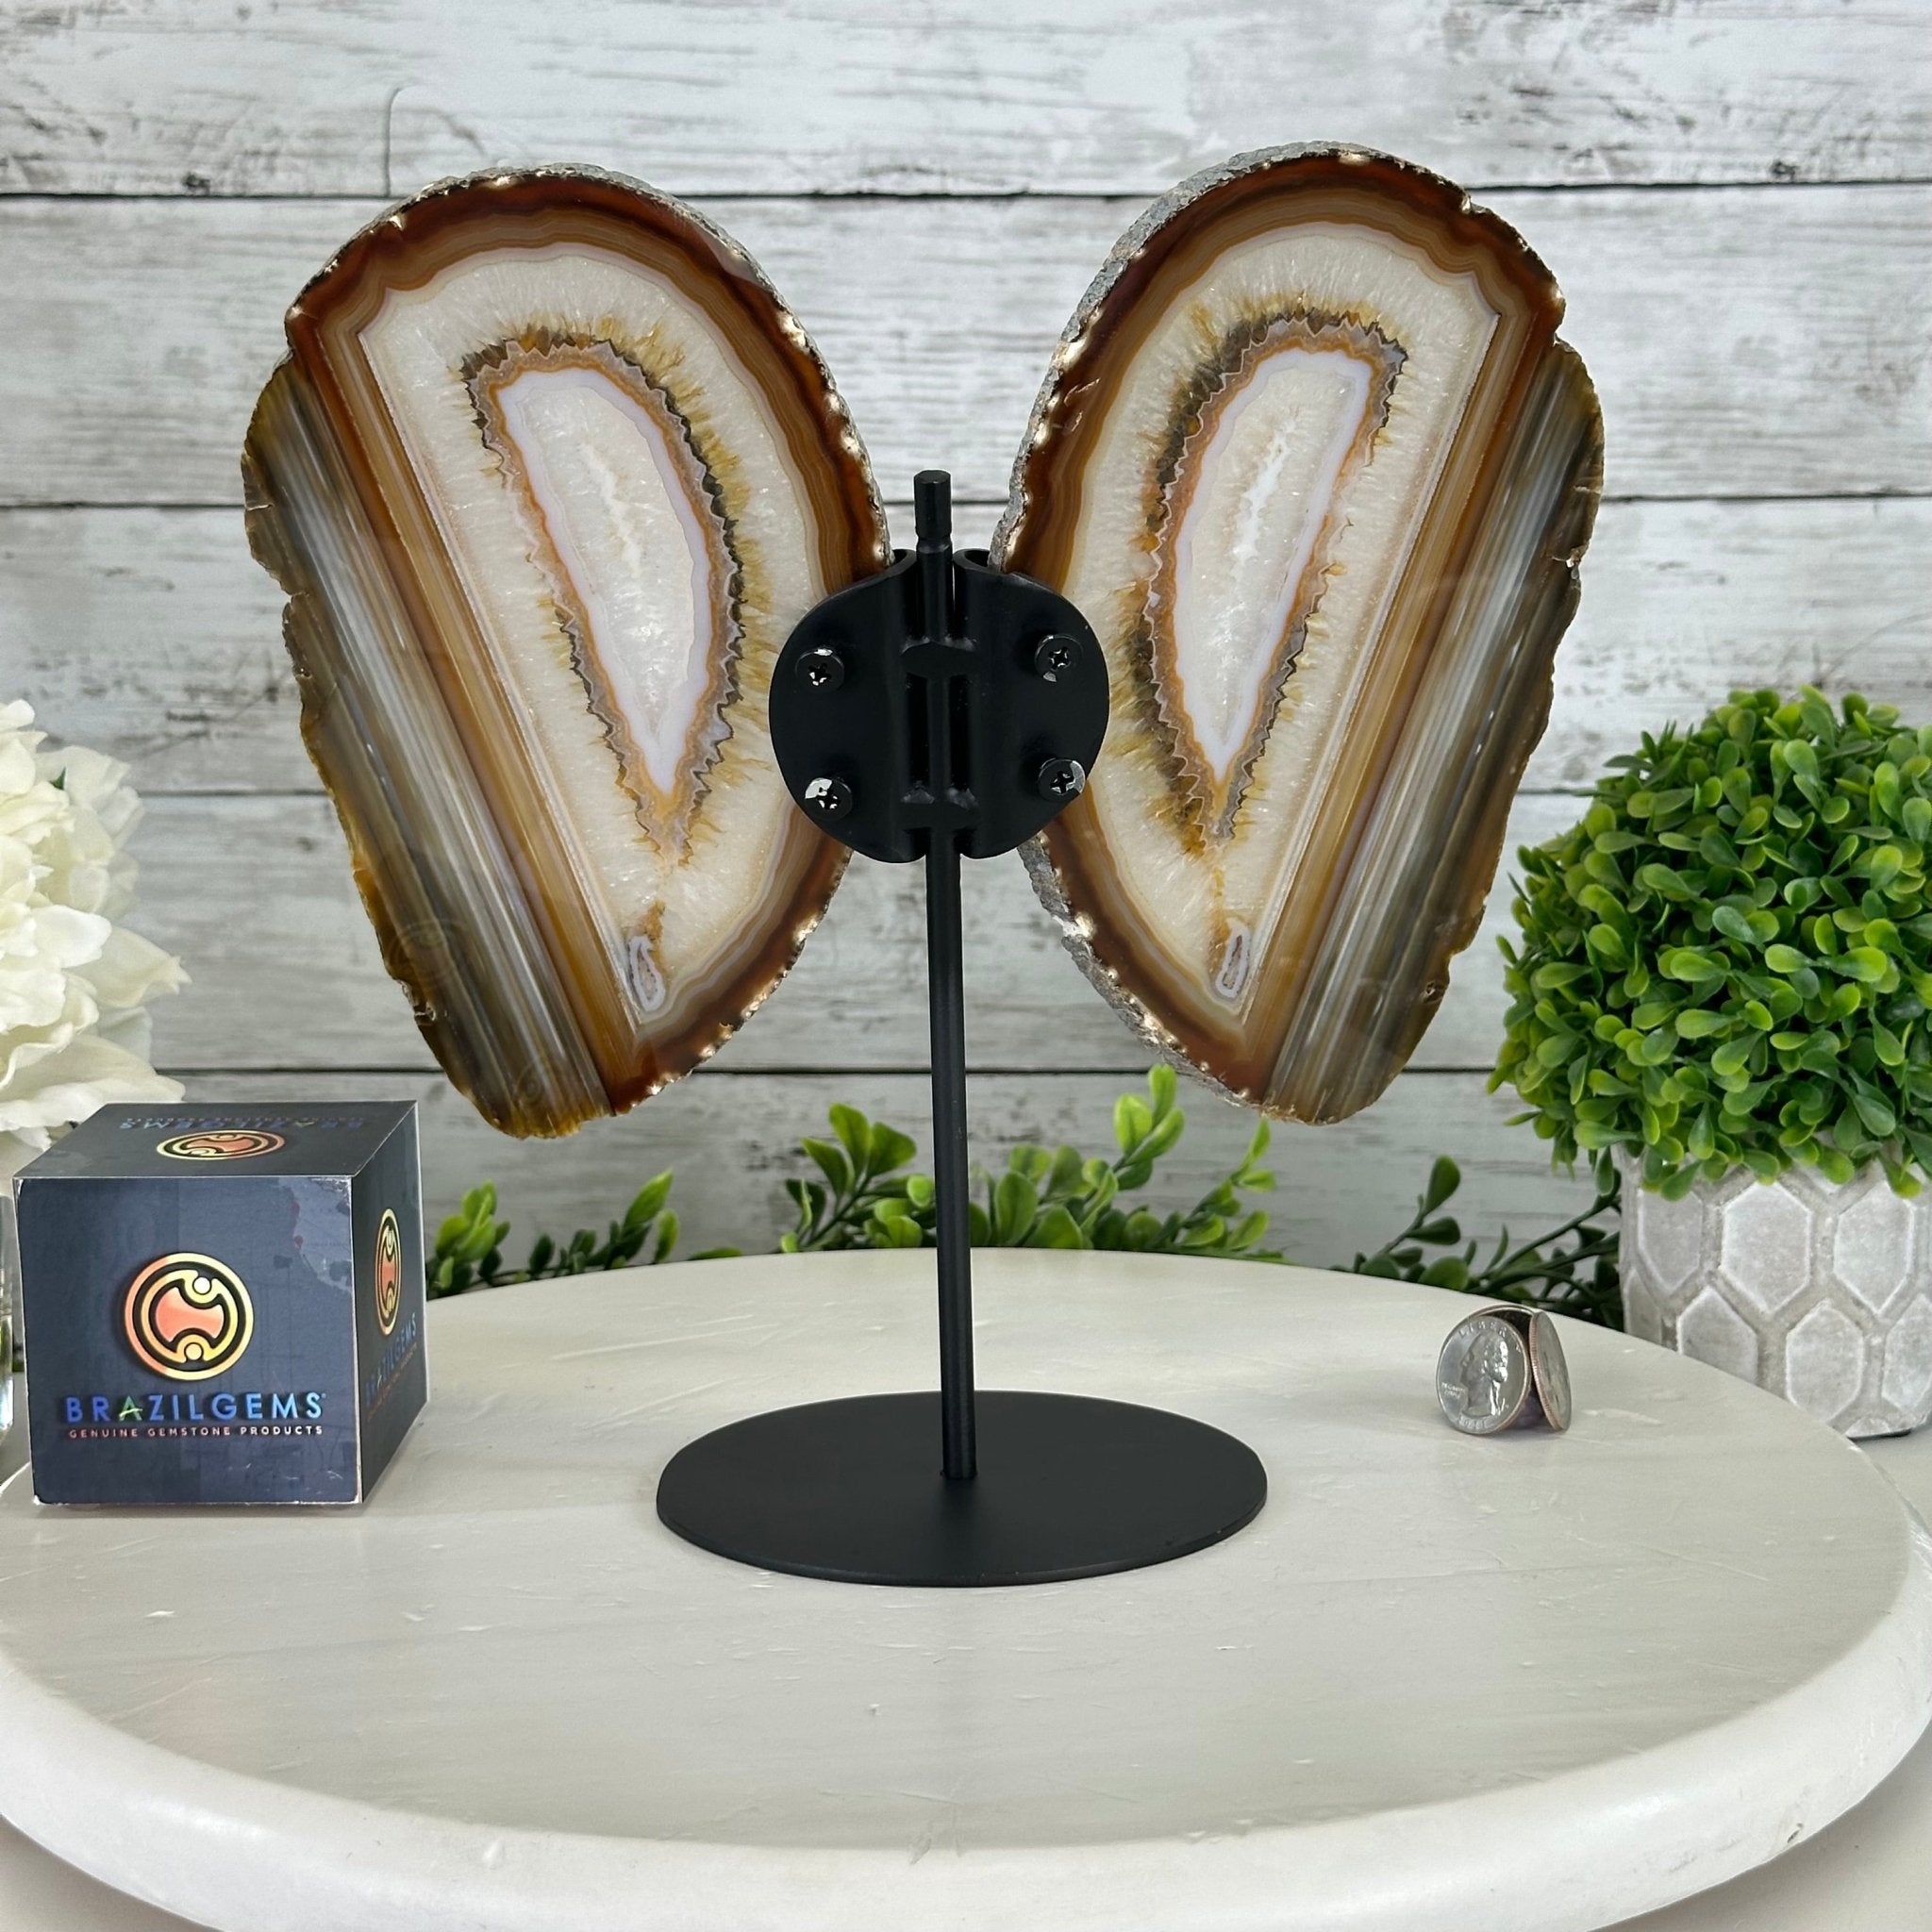 Natural Brazilian Agate "Butterfly Wings", 10.1" Tall #5050NA-130 - Brazil GemsBrazil GemsNatural Brazilian Agate "Butterfly Wings", 10.1" Tall #5050NA-130Agate Butterfly Wings5050NA-130